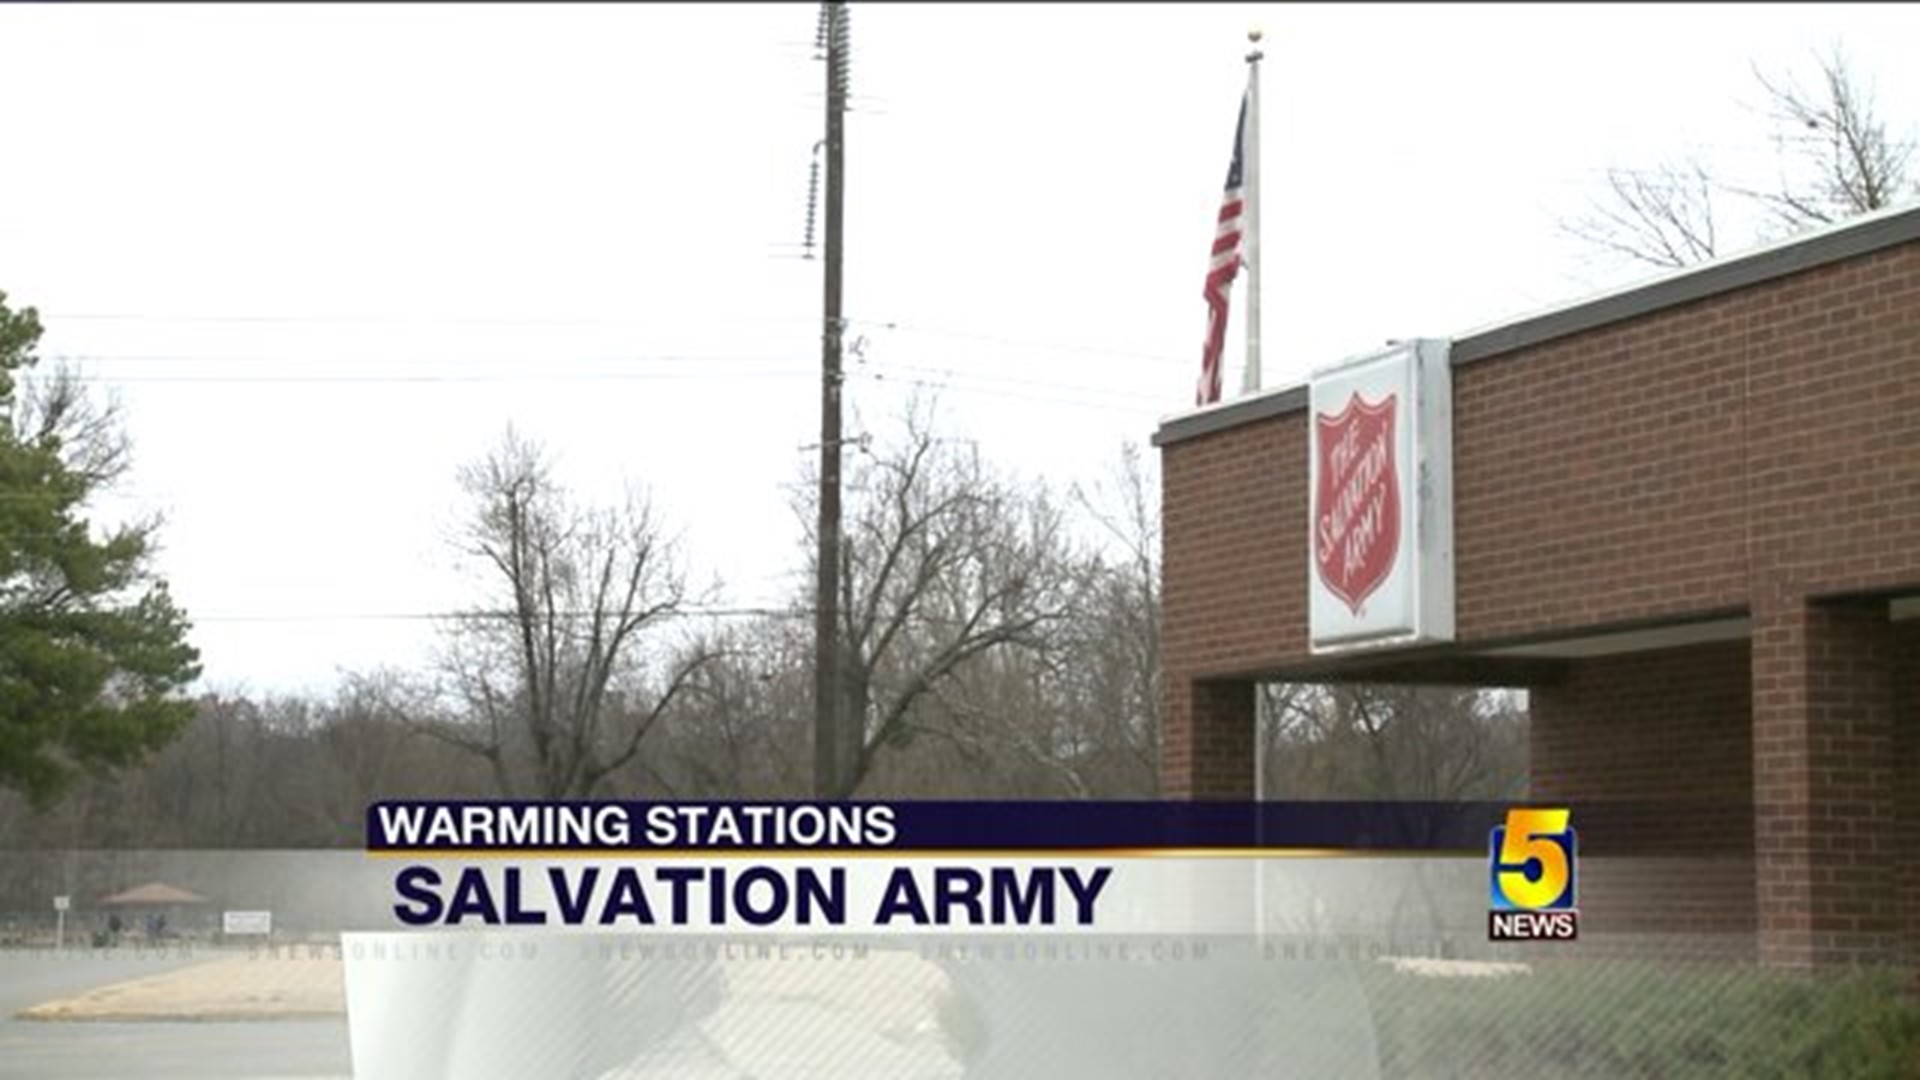 Salvation Army Opens Its Warming Stations